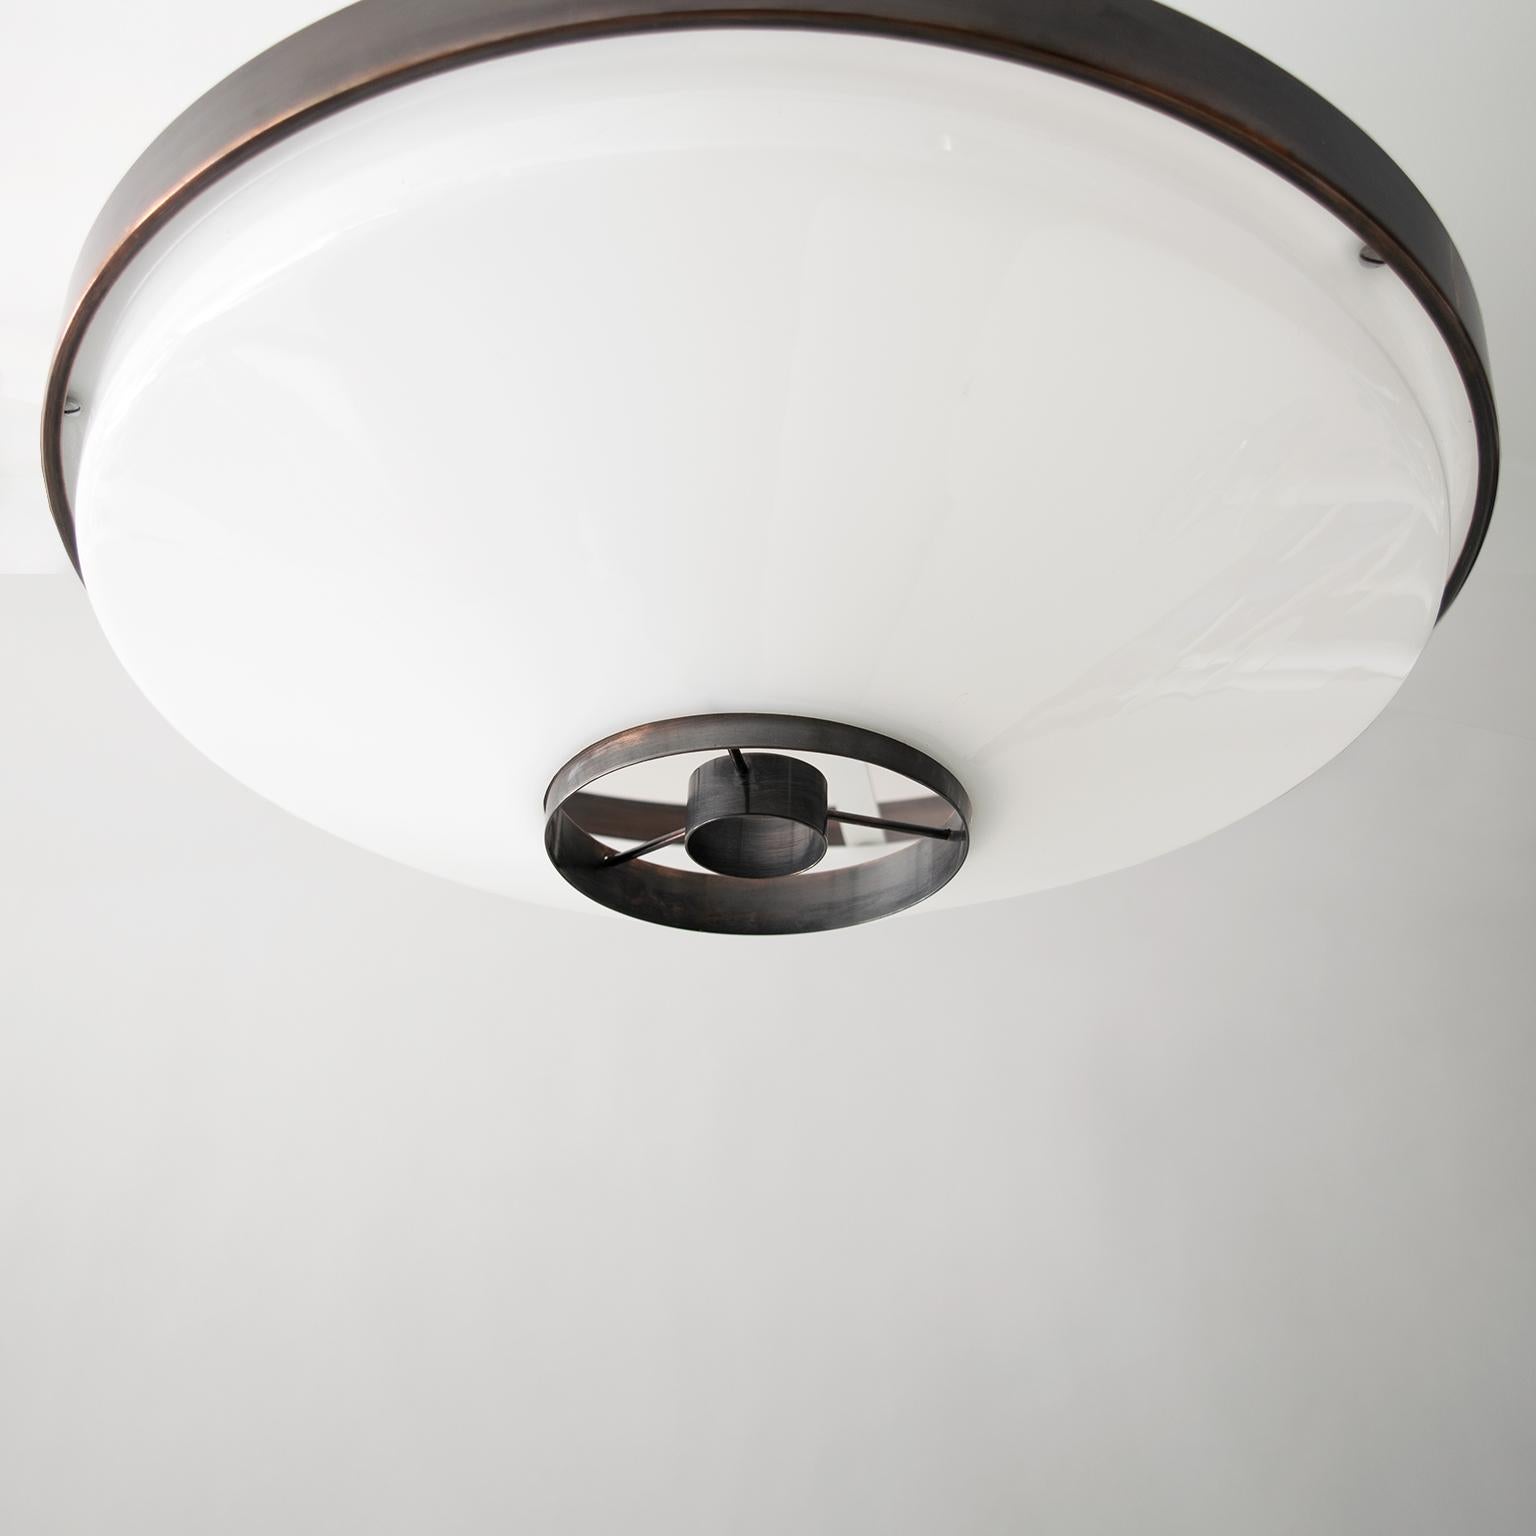 Molded Scandinavian Modern Patinated and Perspex Ceiling Fixture by Itsu, Finland